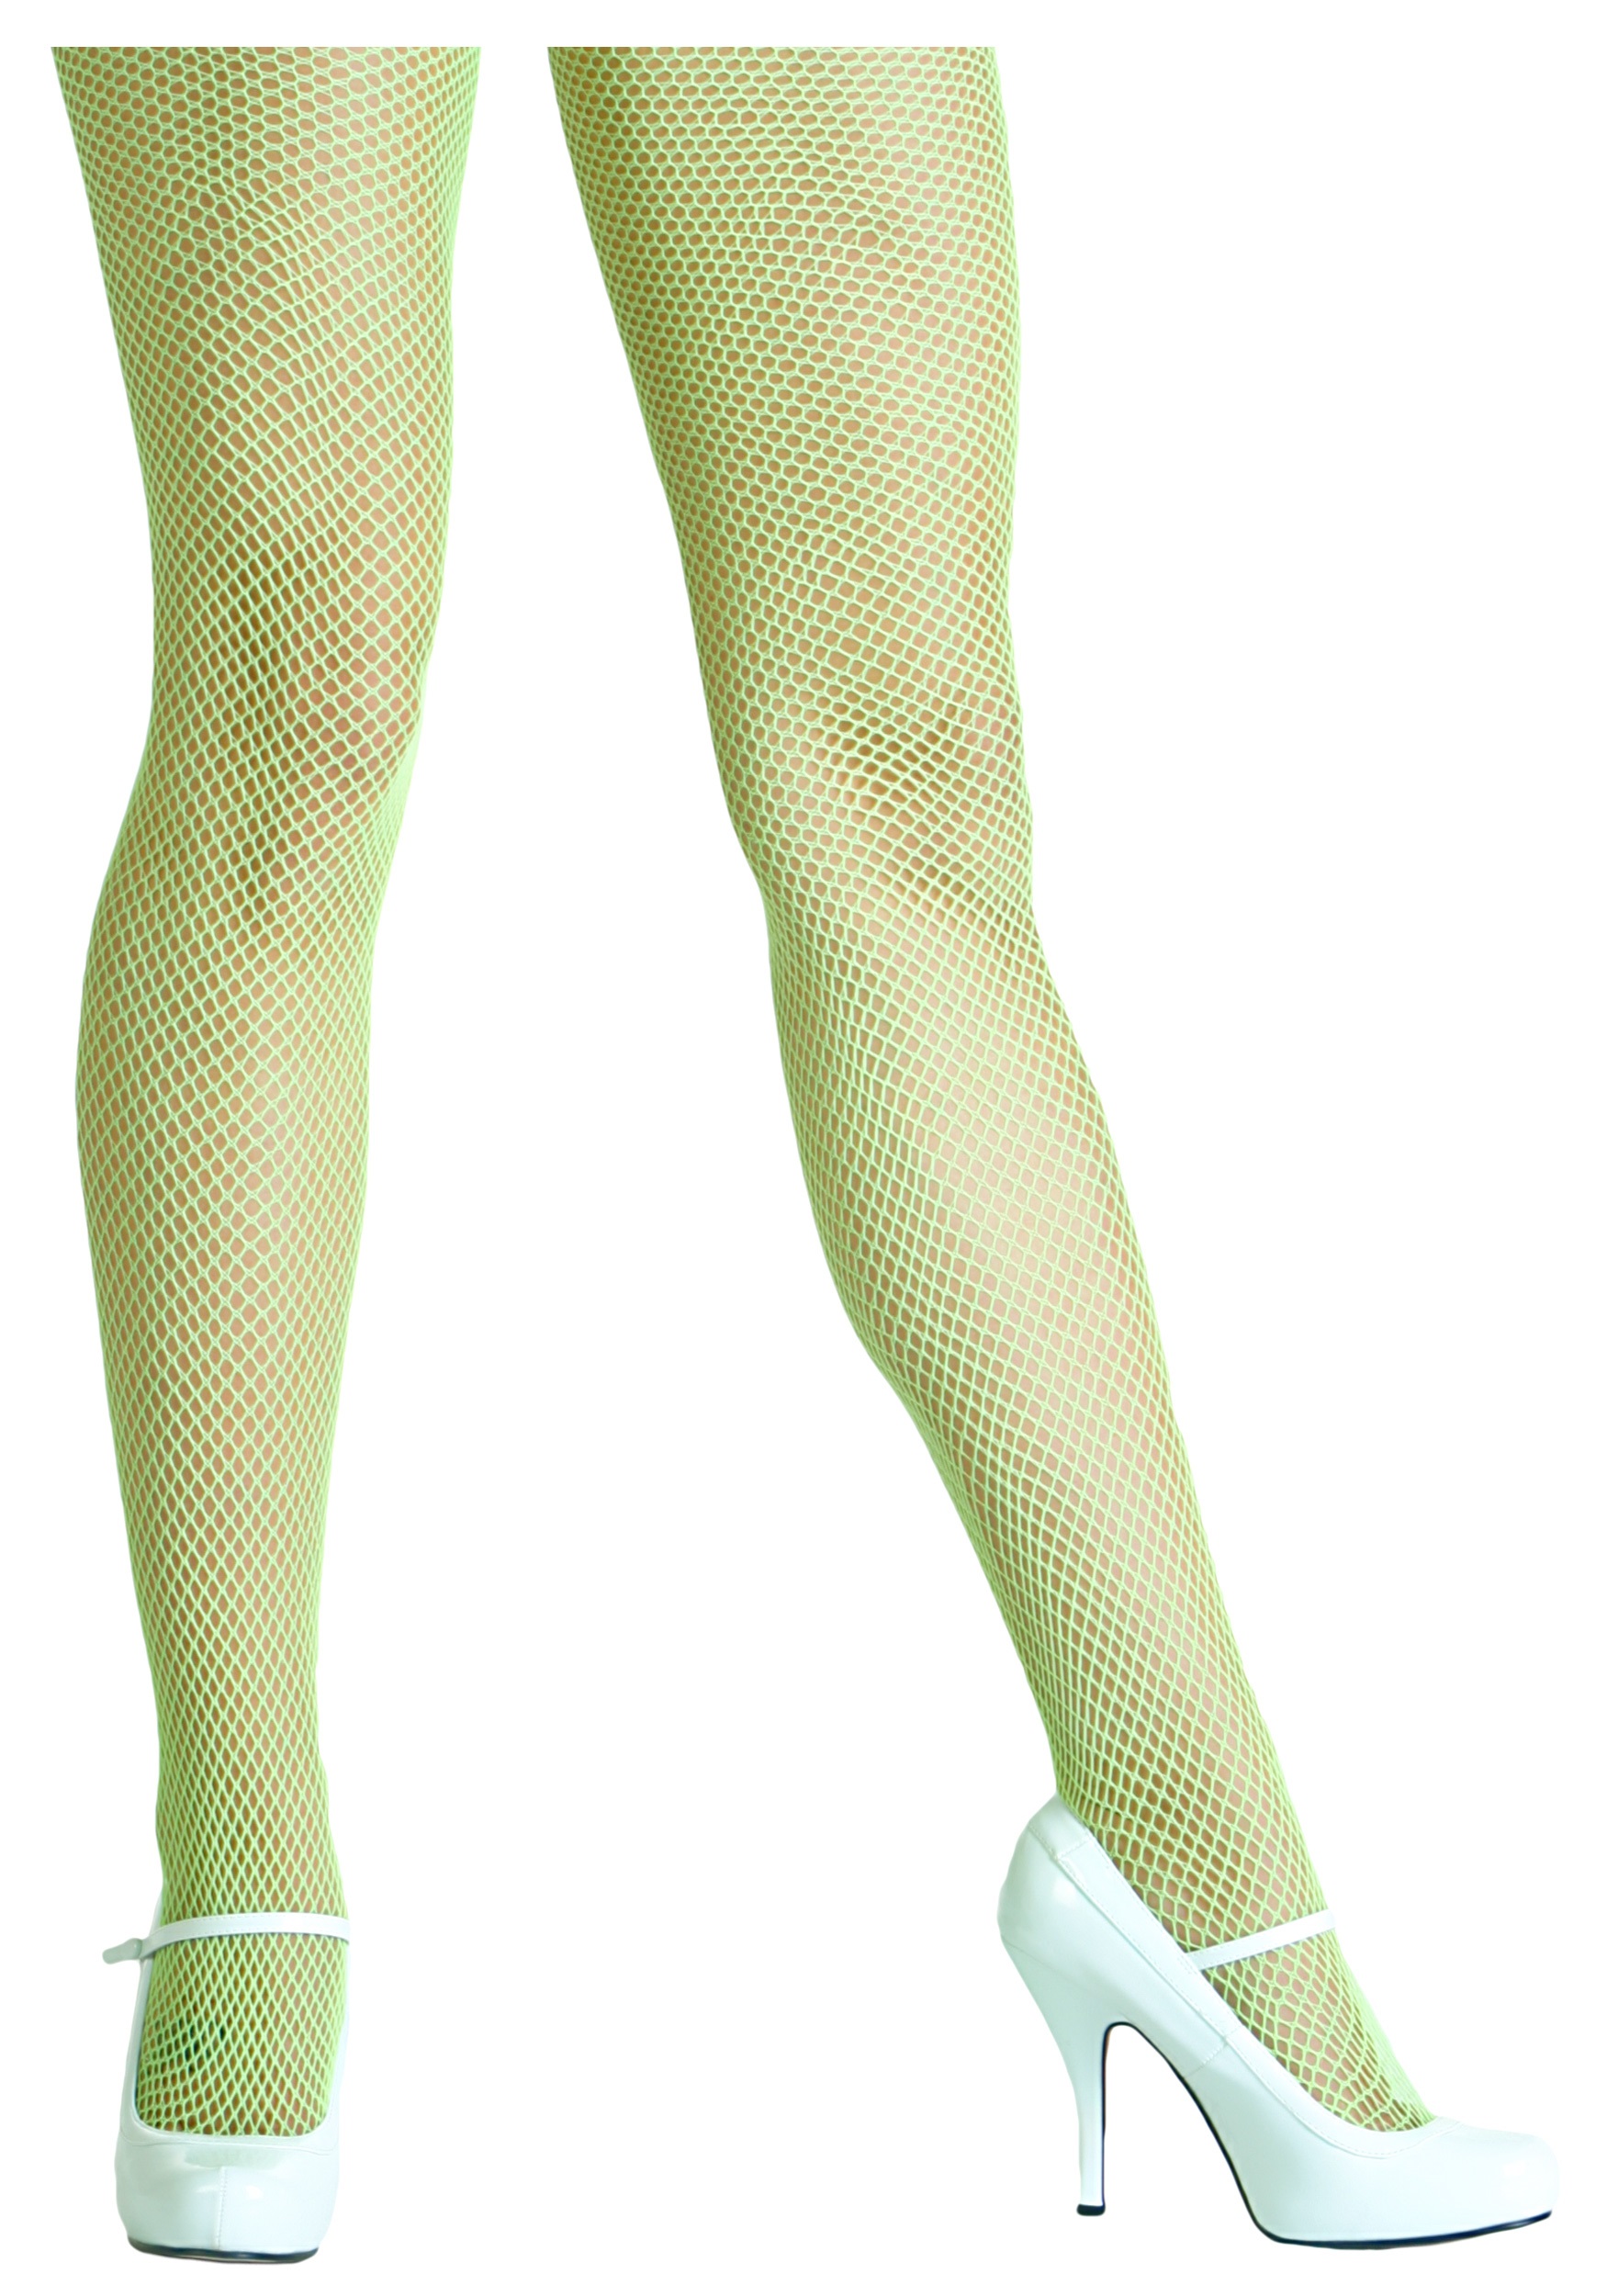 80's Neon Green Adult Costume Fishnet Tights One Size